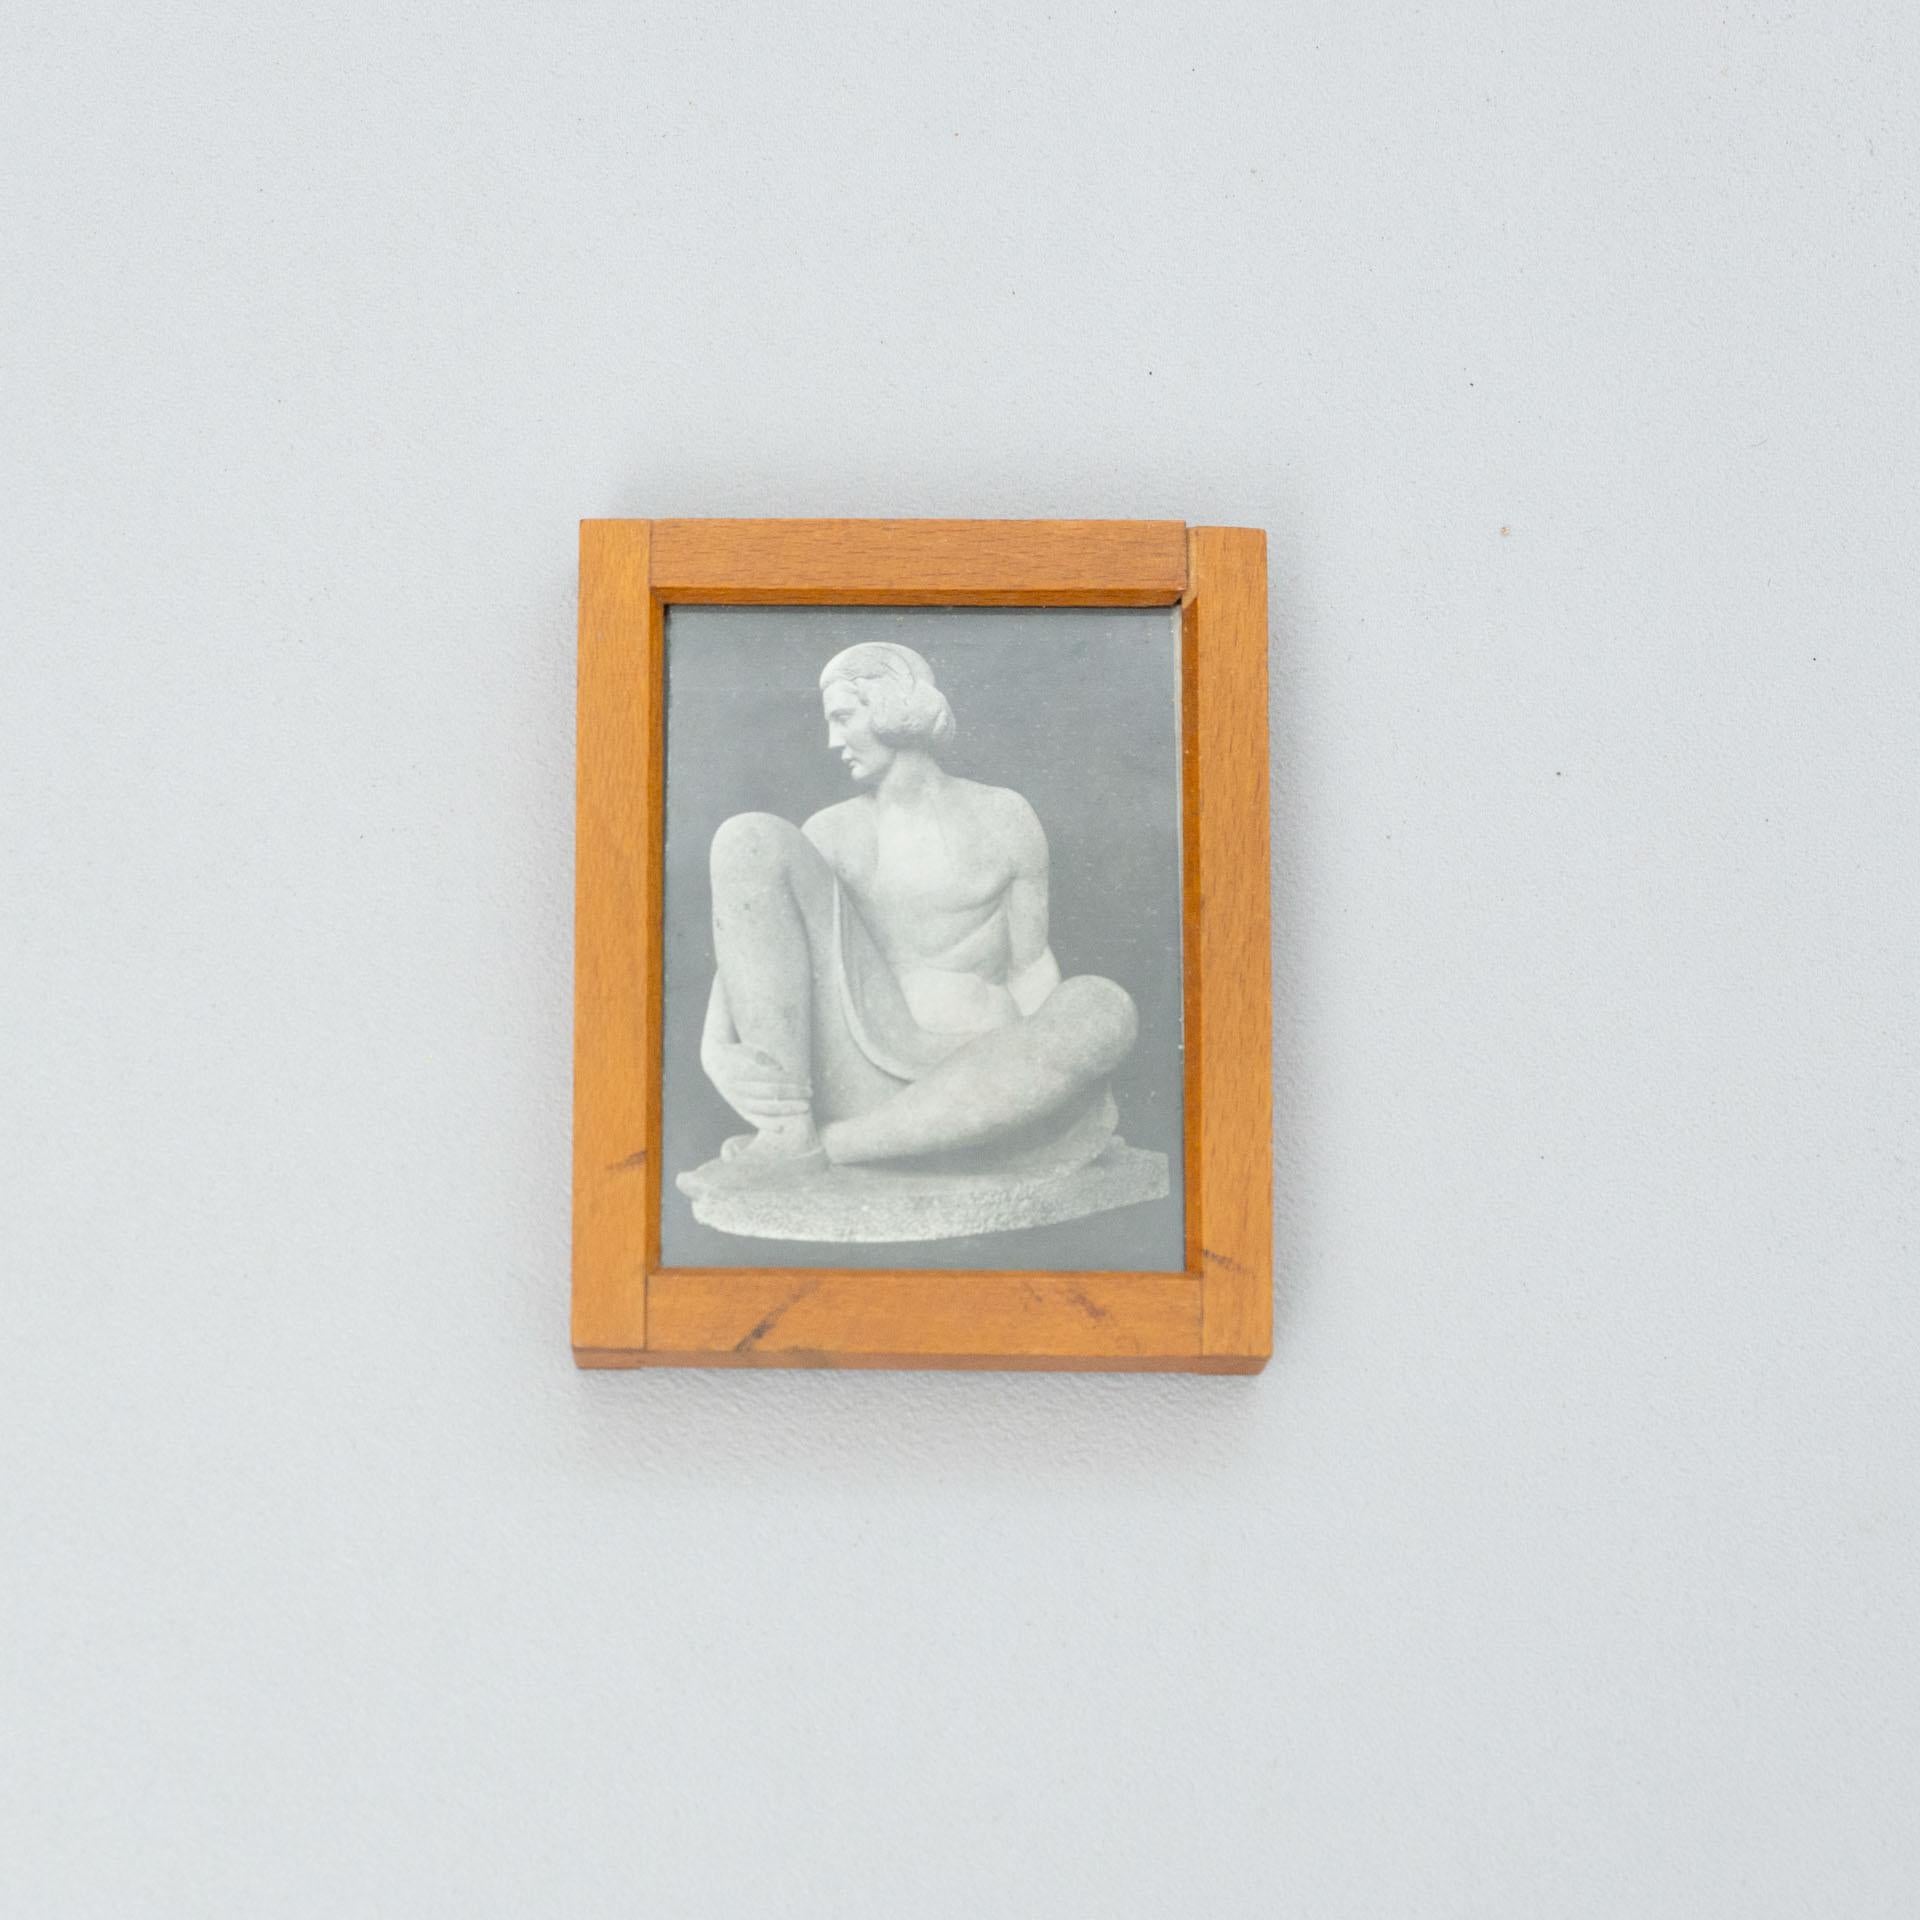 Manolo Hugué archive photography of sculpture.
Printed, circa 1960.
Wood frame included.


Materials:
Gelatin silver bromide print

Dimensions:
D 2 cm x W 10.5 cm x H 13 cm

We offer free worldwide shipping for this piece.